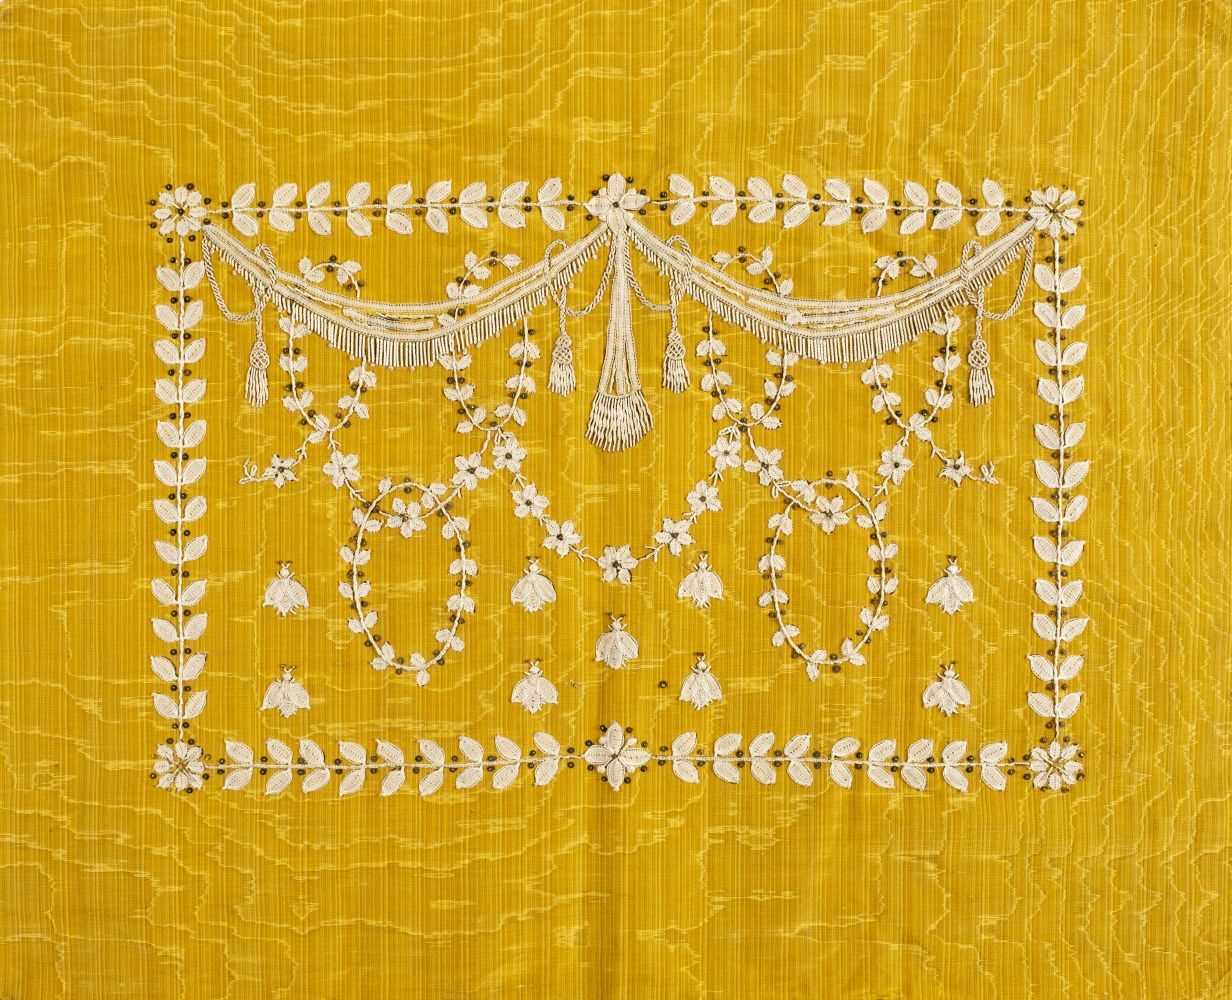 Lot 155 - Embroidery. A collection of embroidered fabrics, 19th-20th century